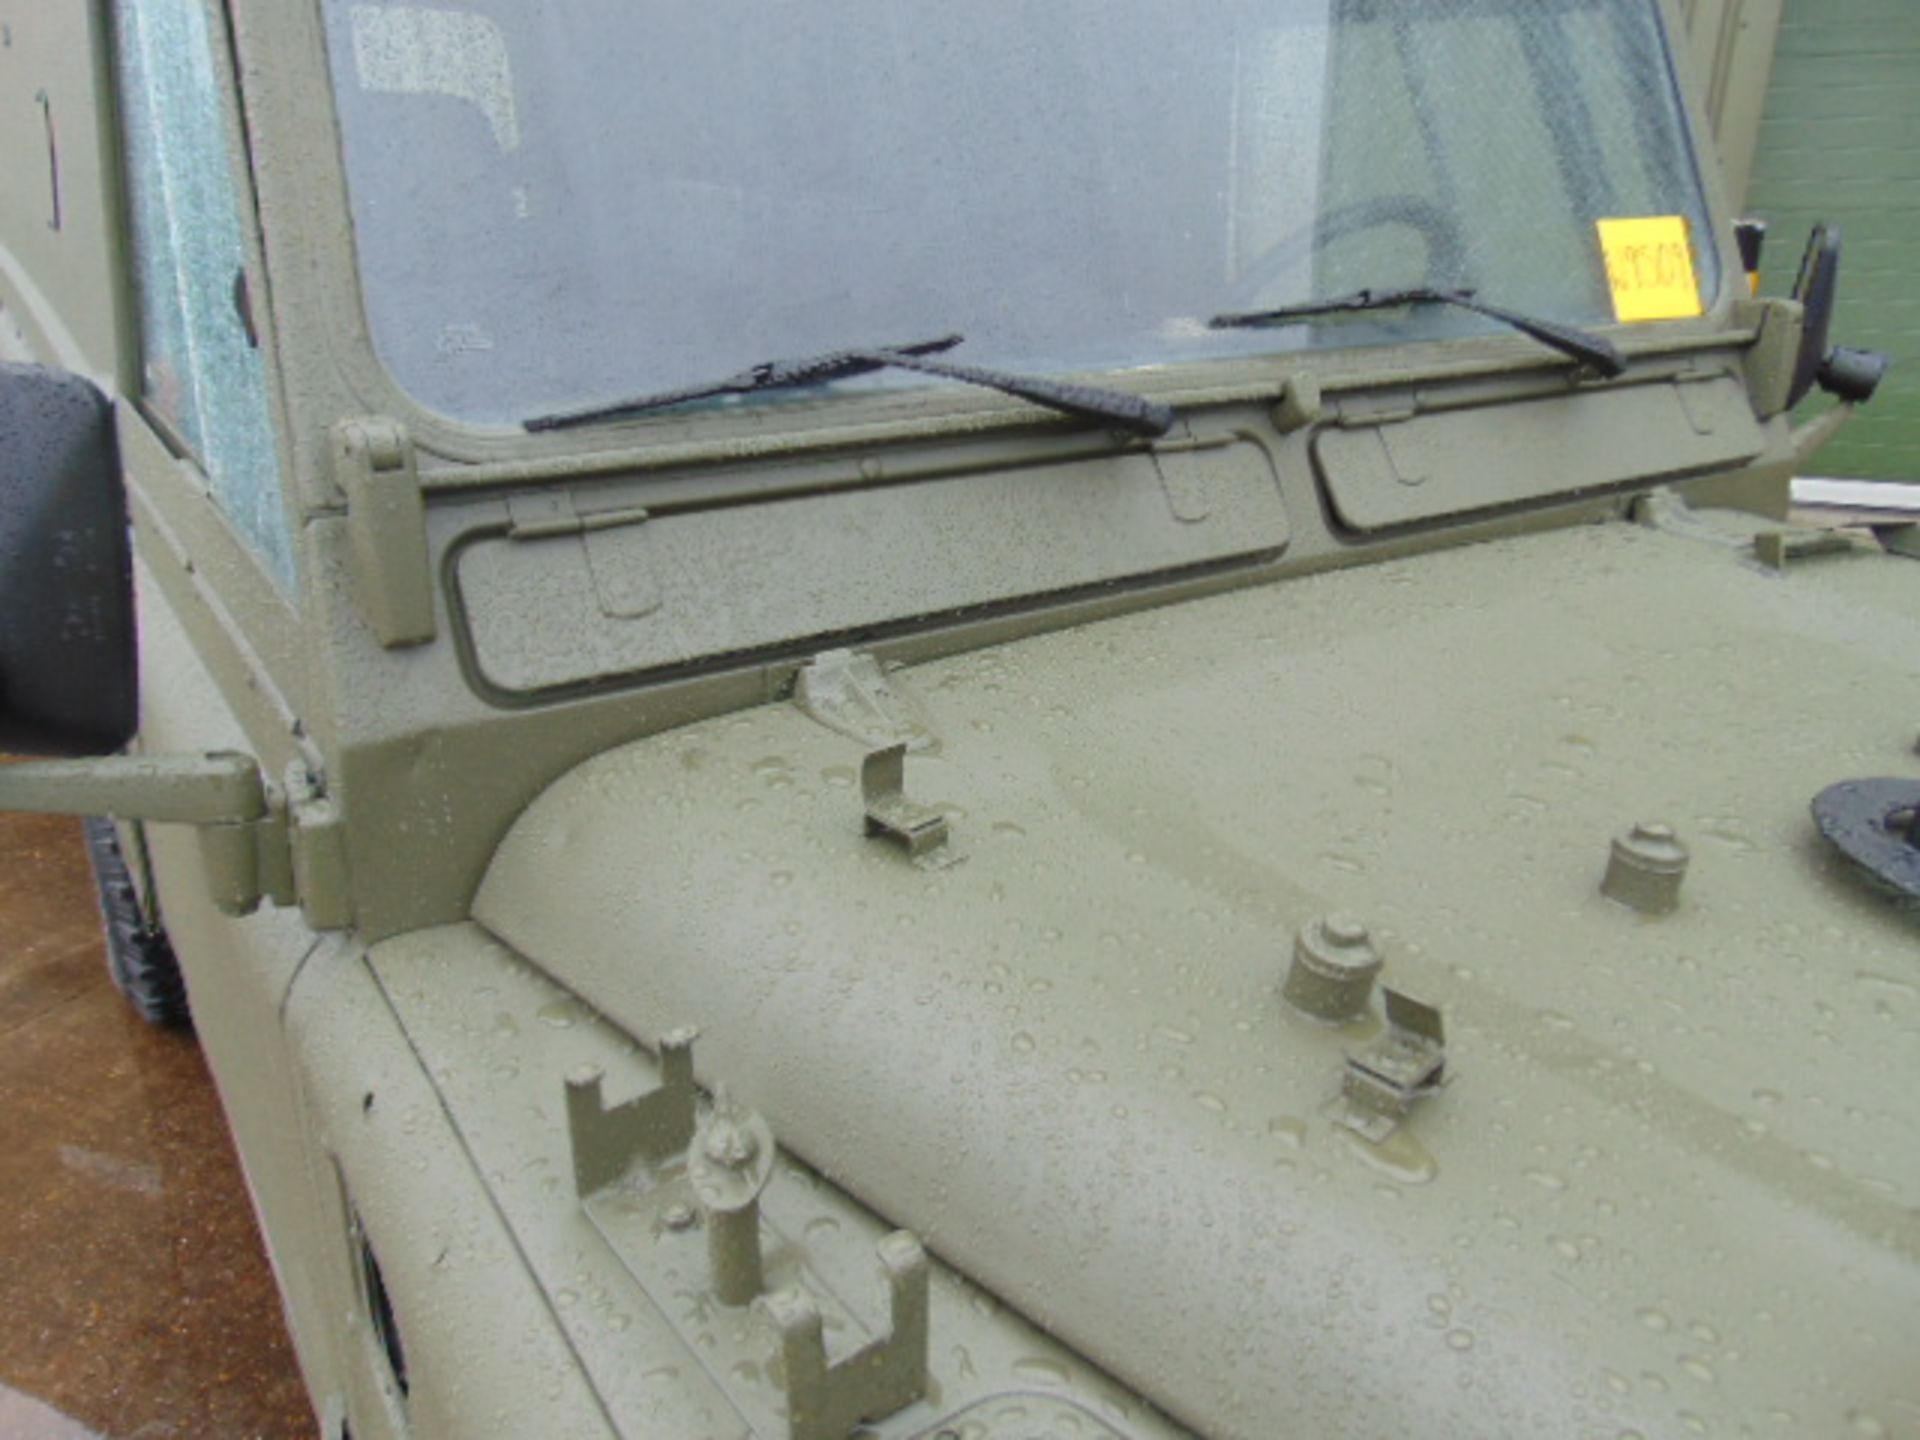 Military Specification Land Rover Wolf 110 Hard Top Left Hand Drive - Image 13 of 25